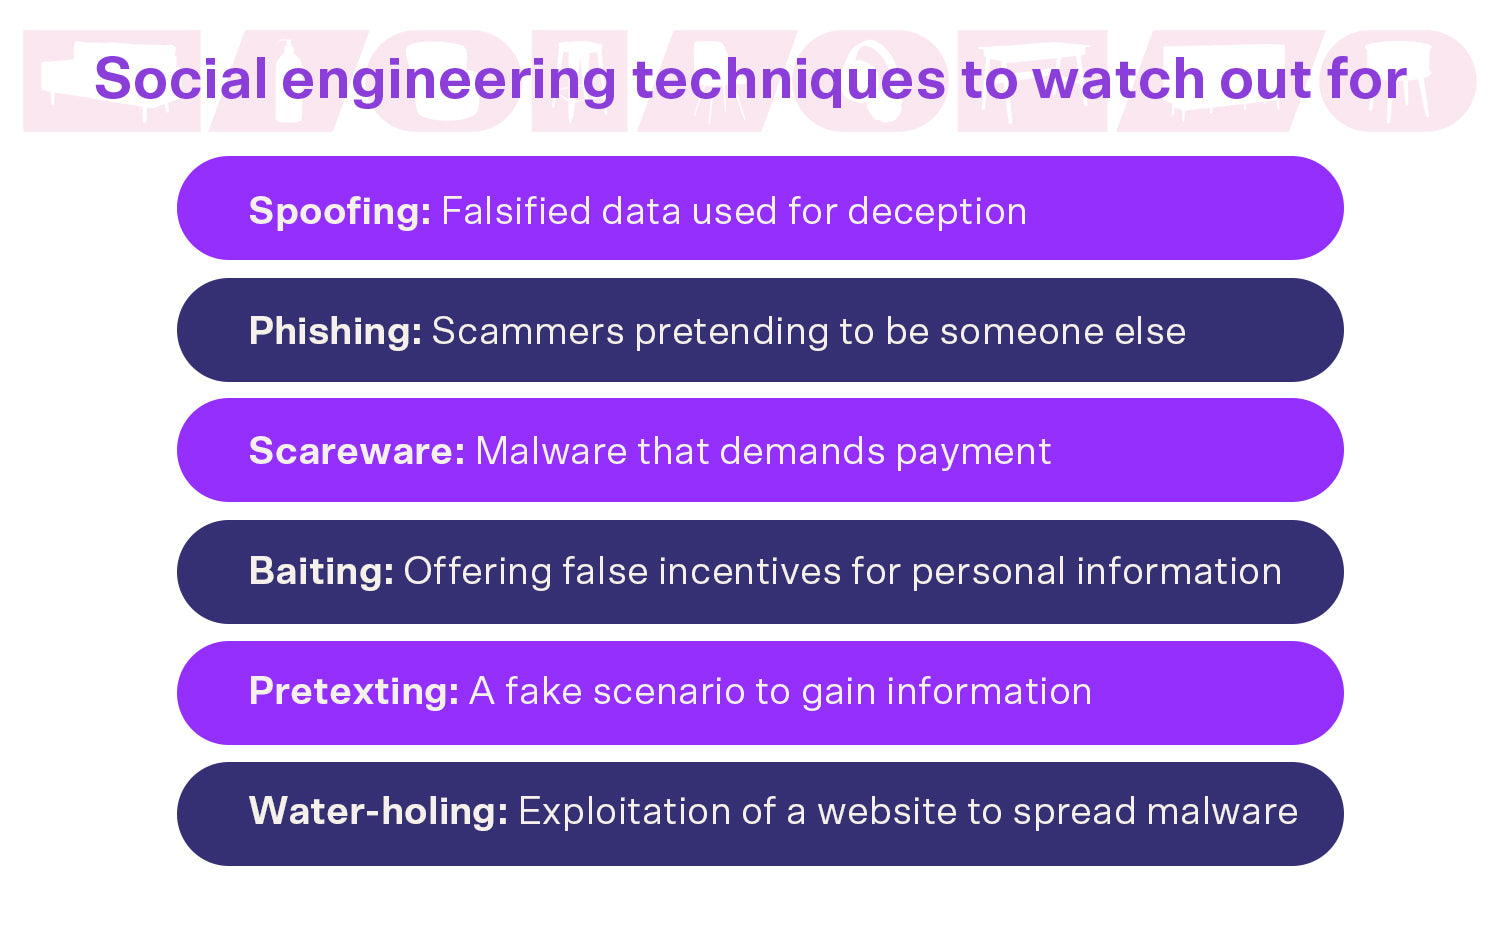 Types of social engineering techniques include spoofing, phishing and baiting.